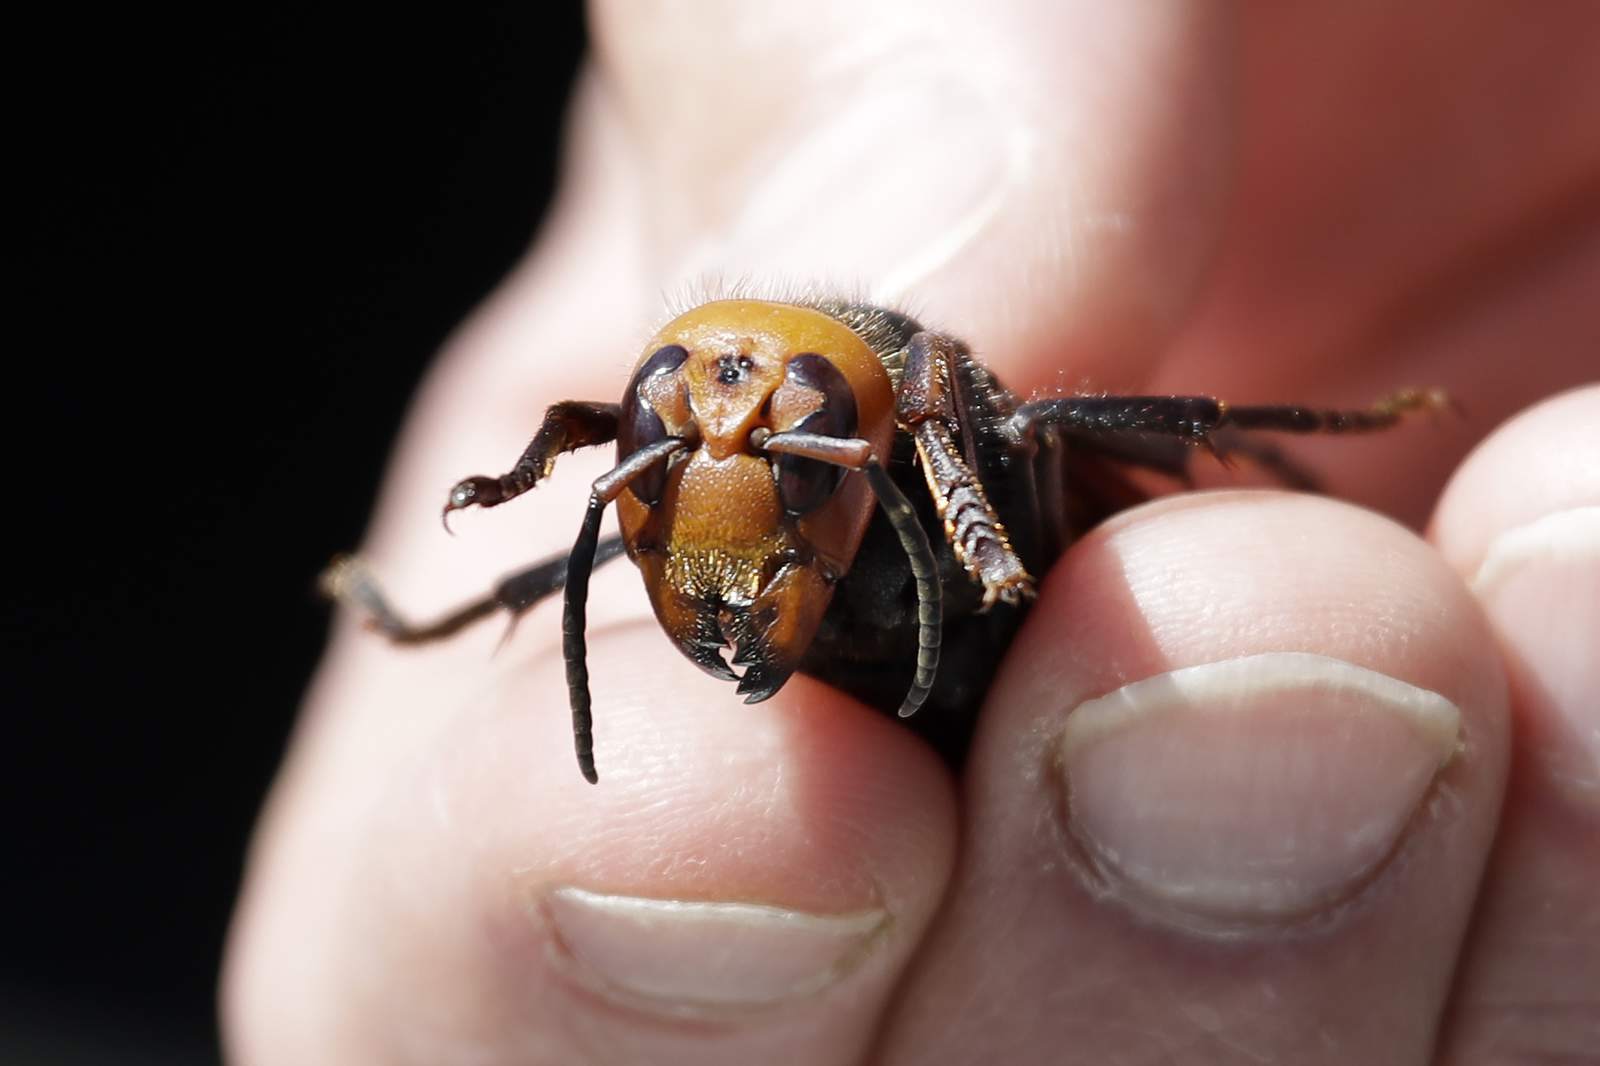 Two more Asian ’murder hornets’ found in Washington State, WSDA officials say